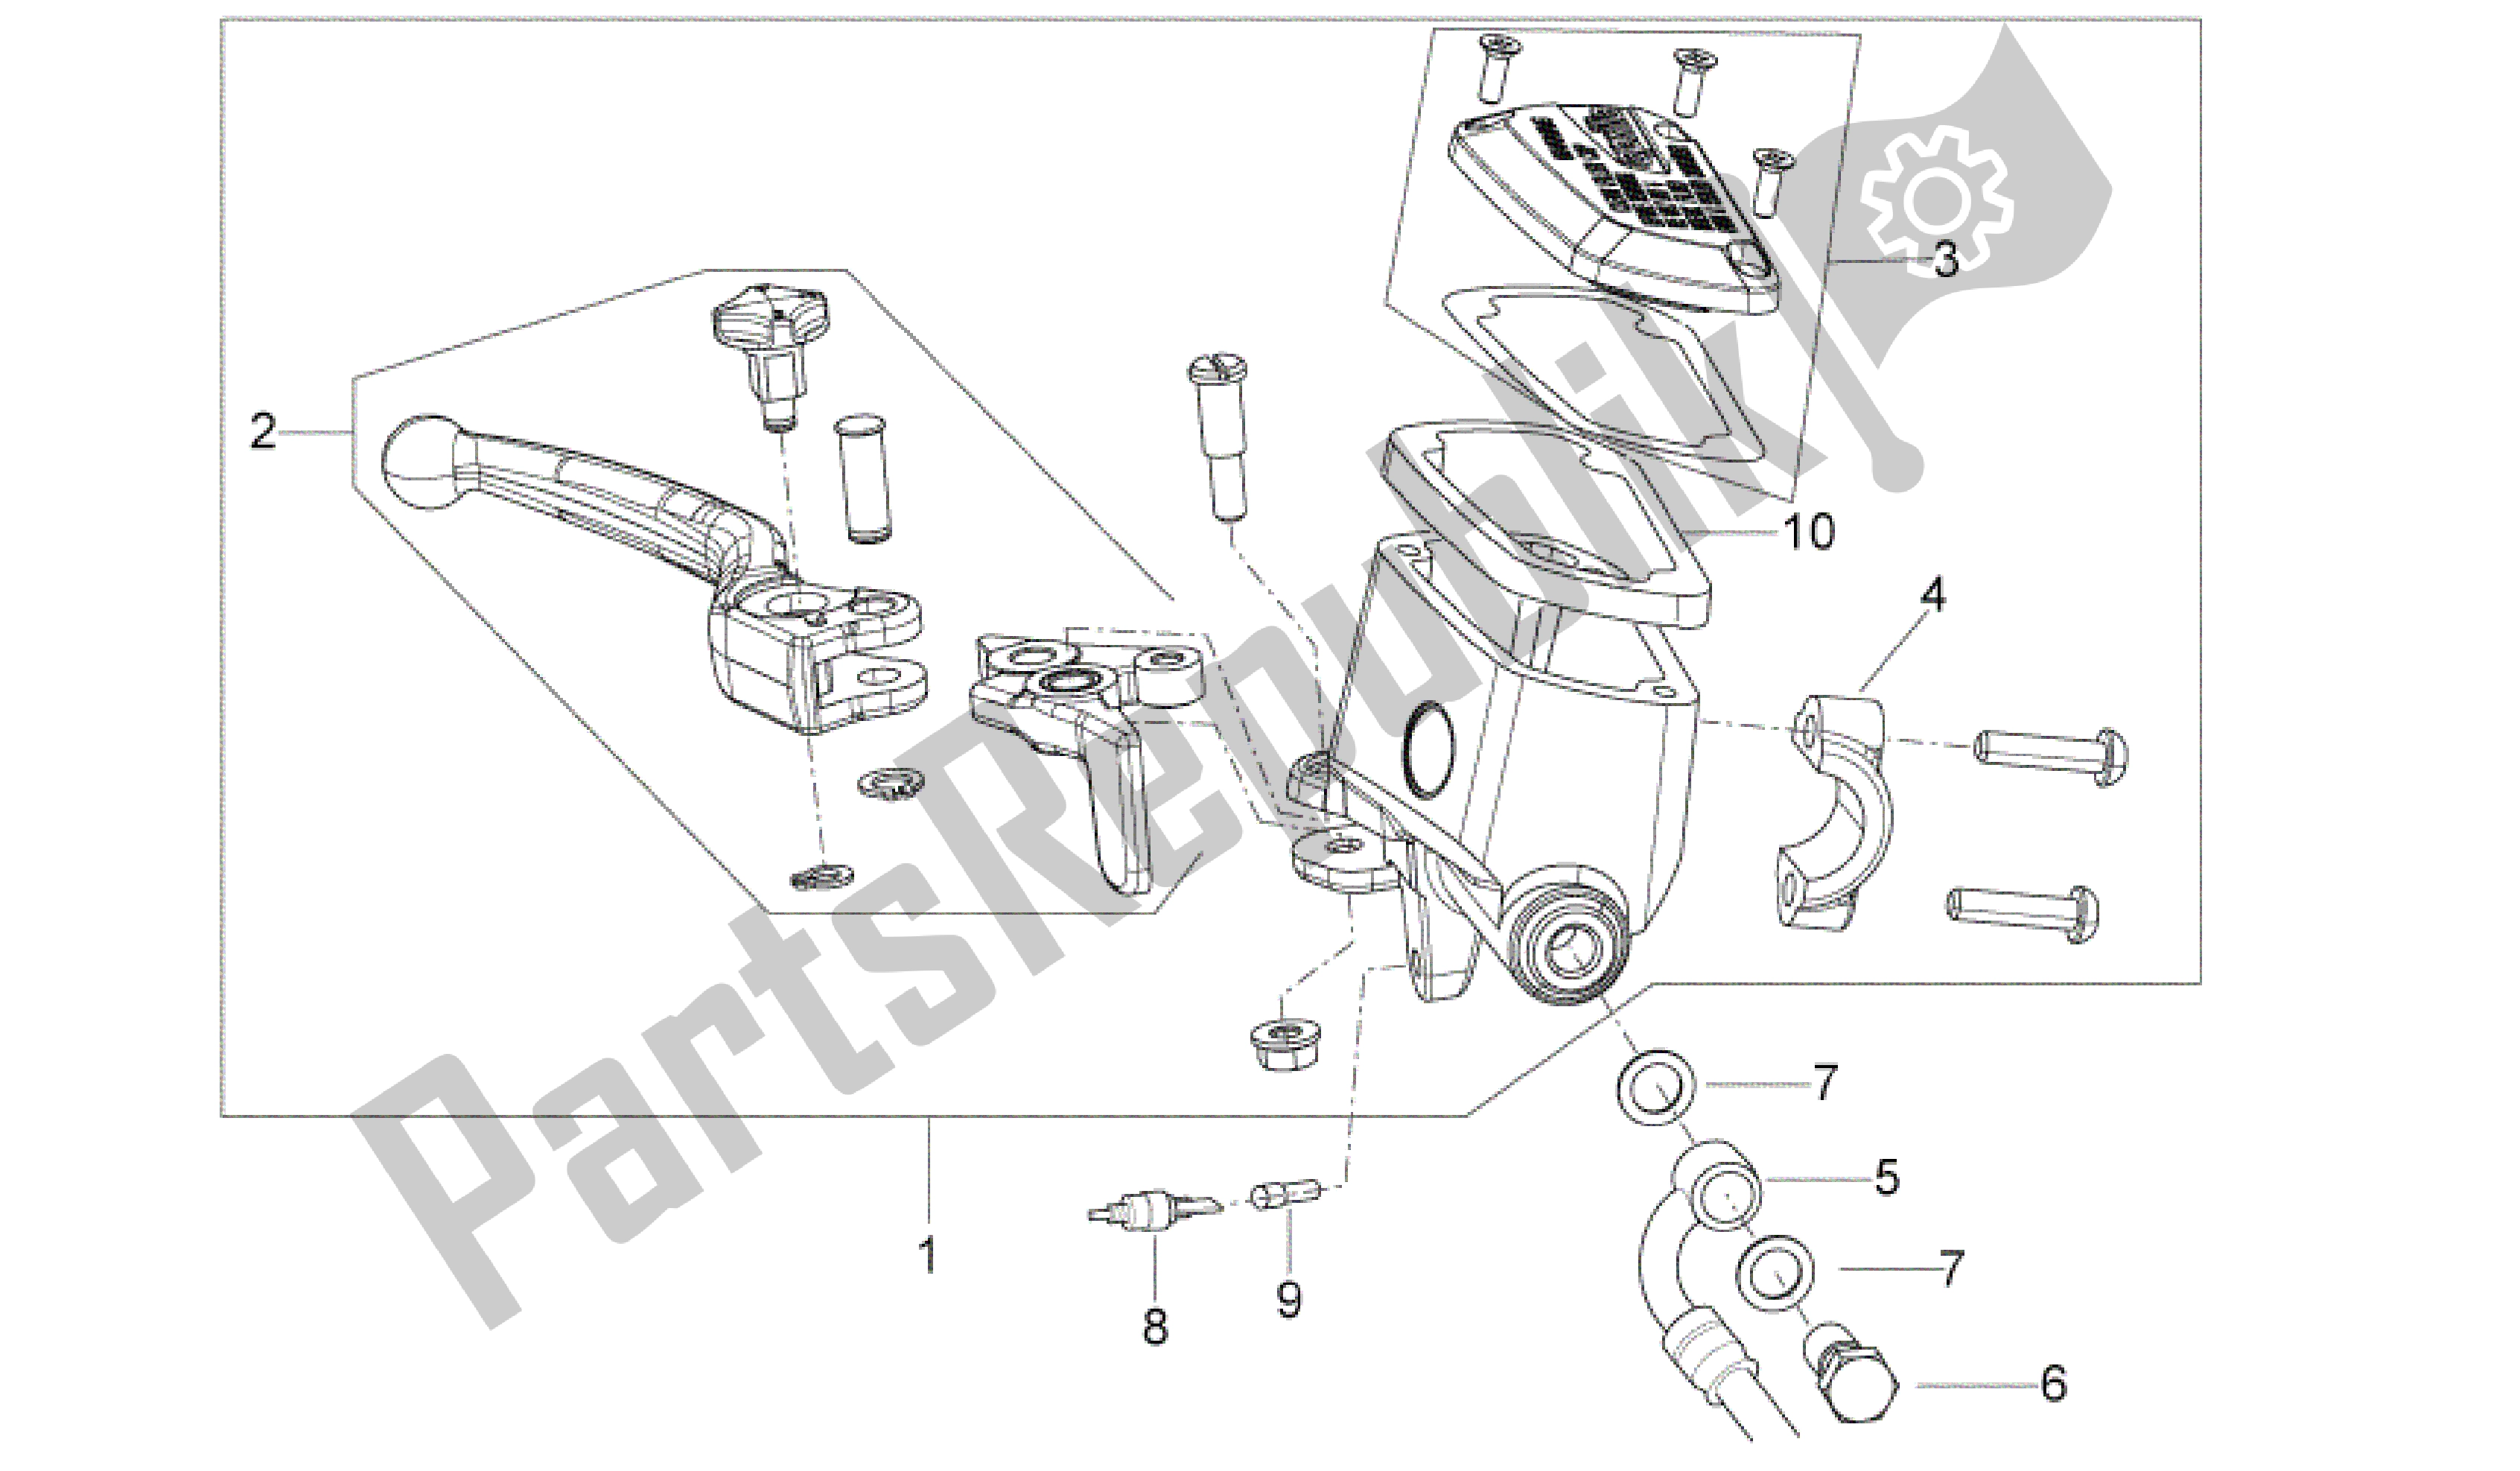 All parts for the Front Master Cilinder of the Aprilia Shiver 750 2011 - 2013